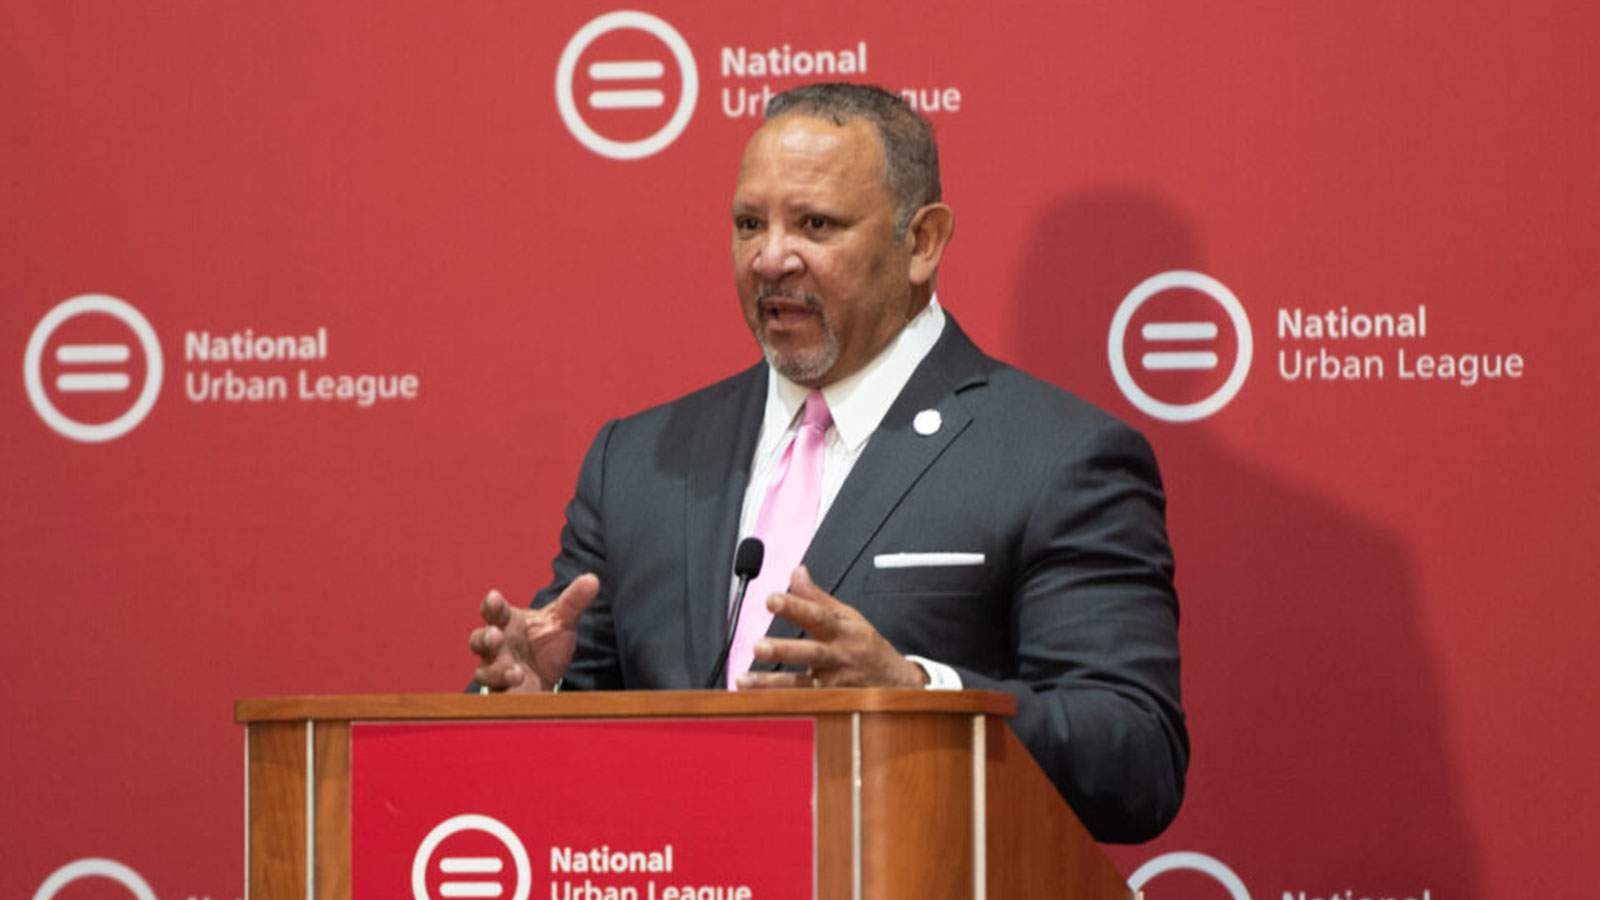 NUL President Marc Morial continues to fight ‘backlash’ against Black progress